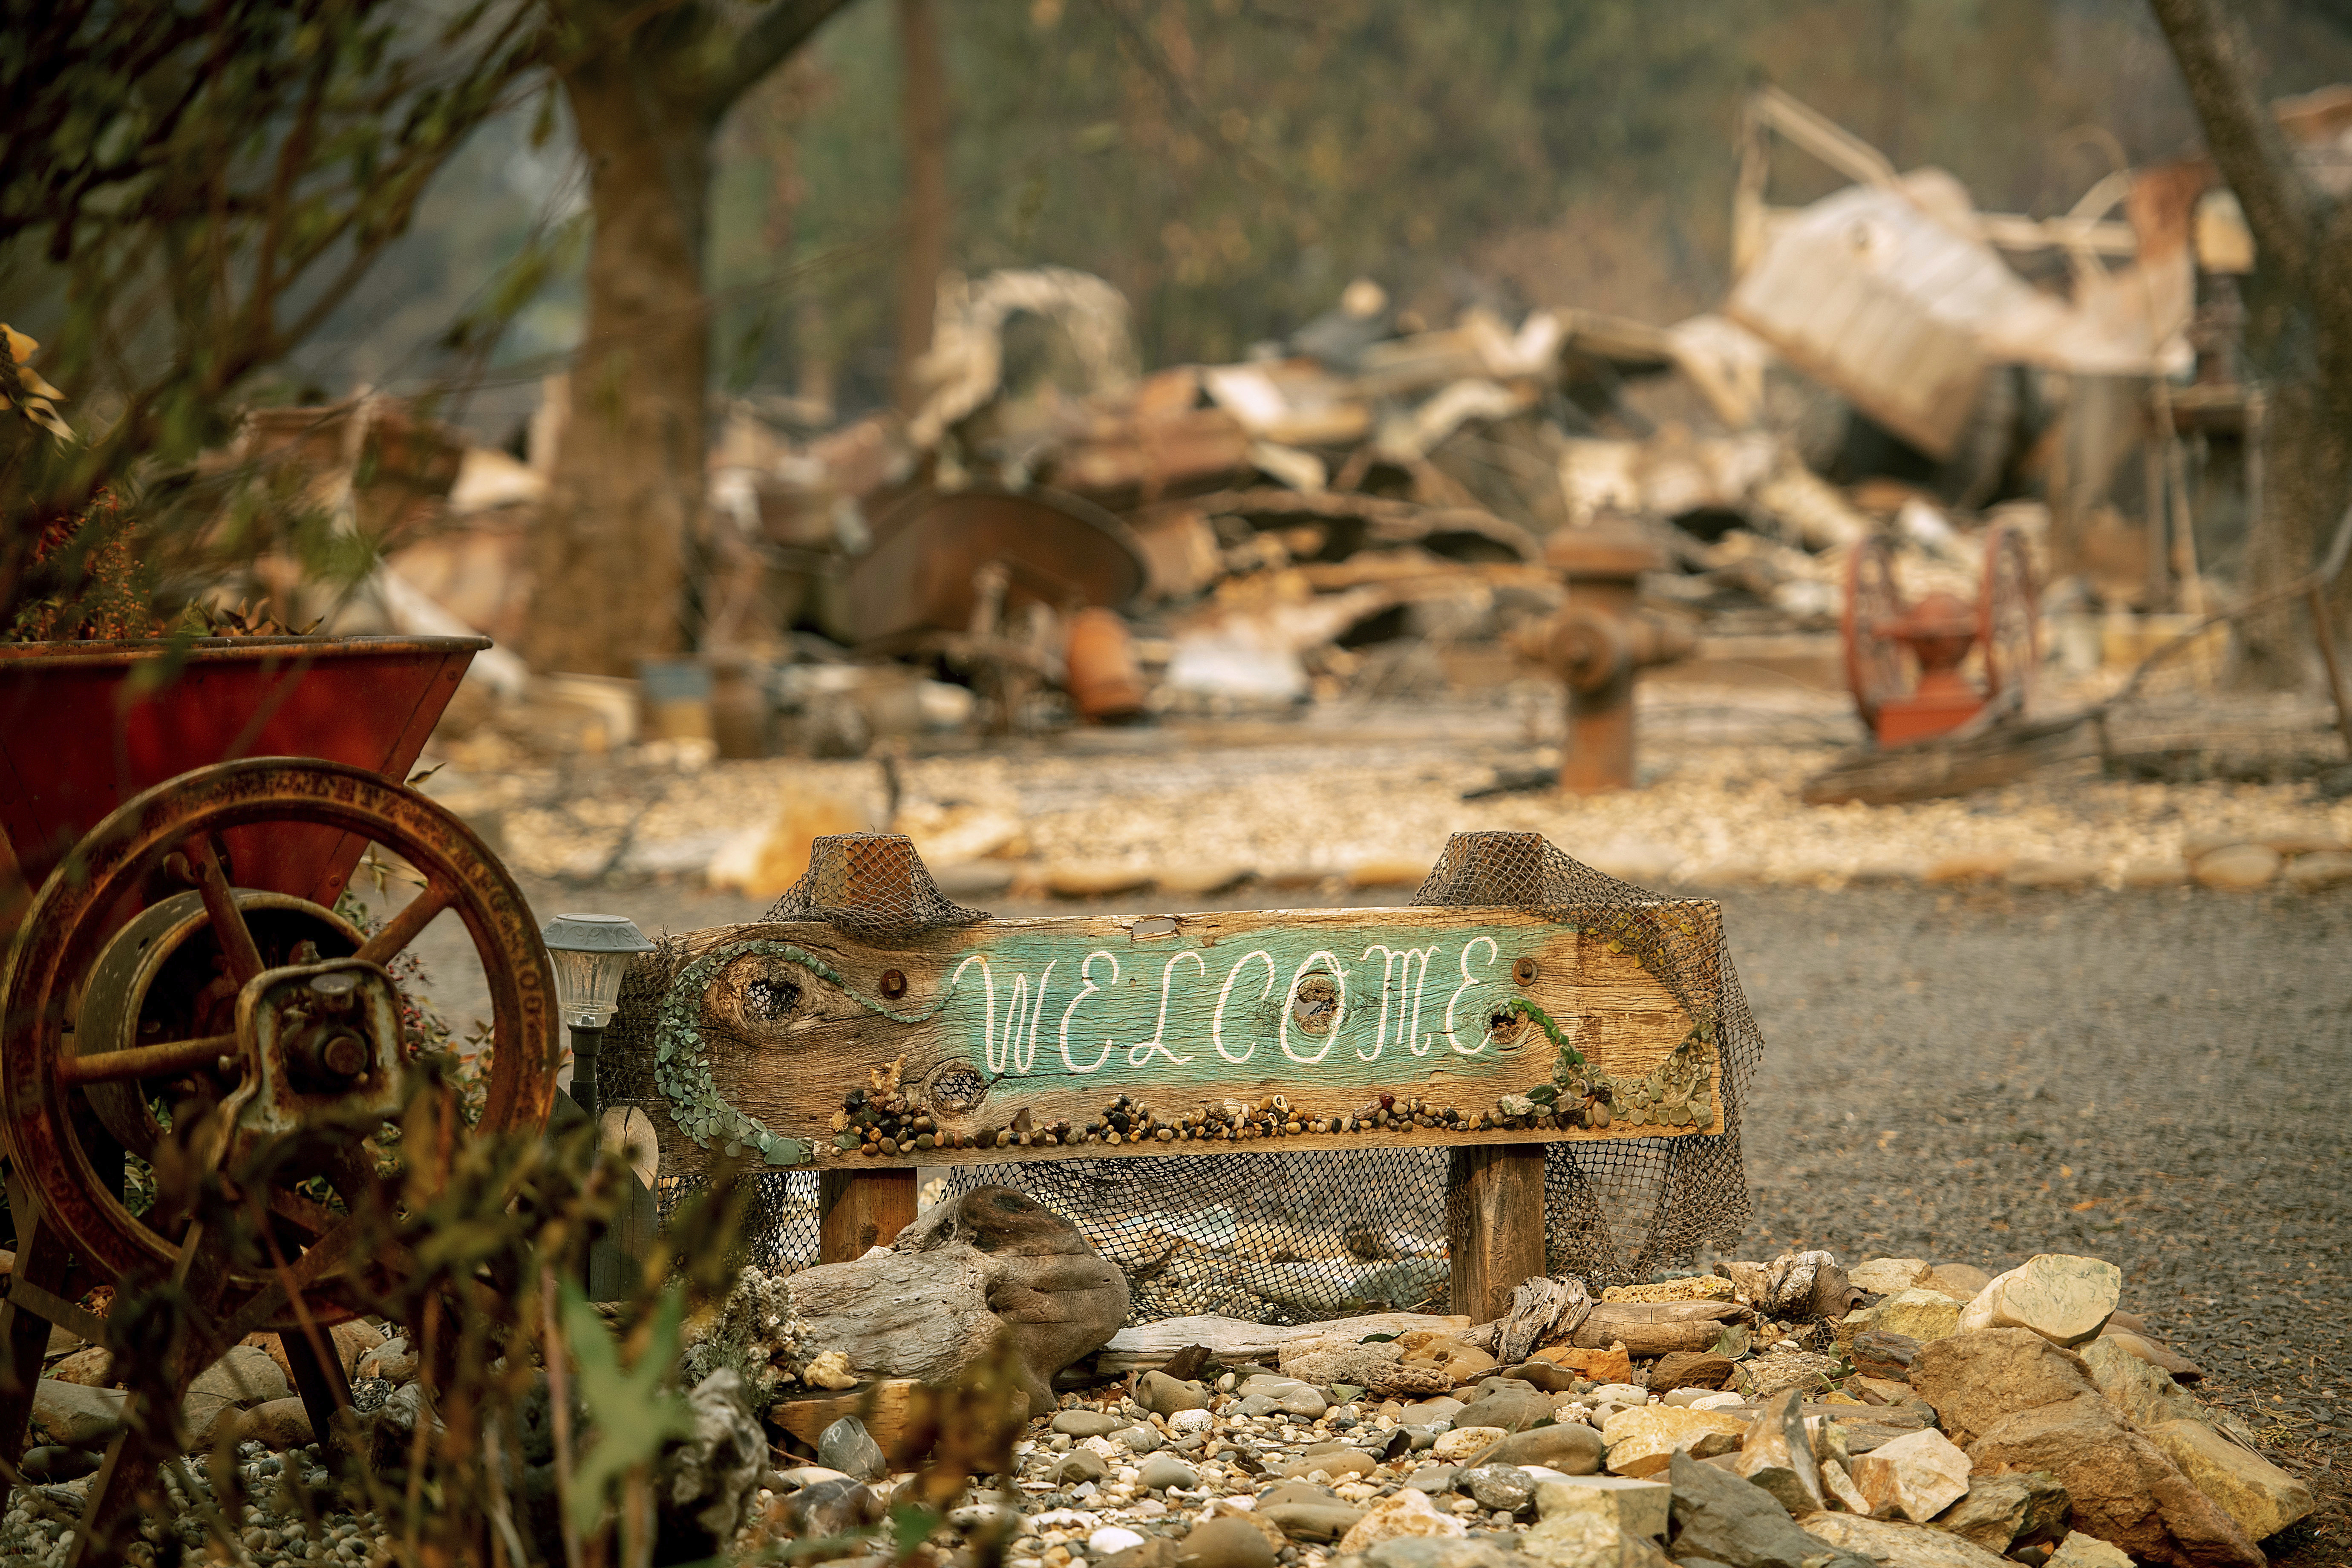 A welcome sign outside a destroyed home in Paradise, California.